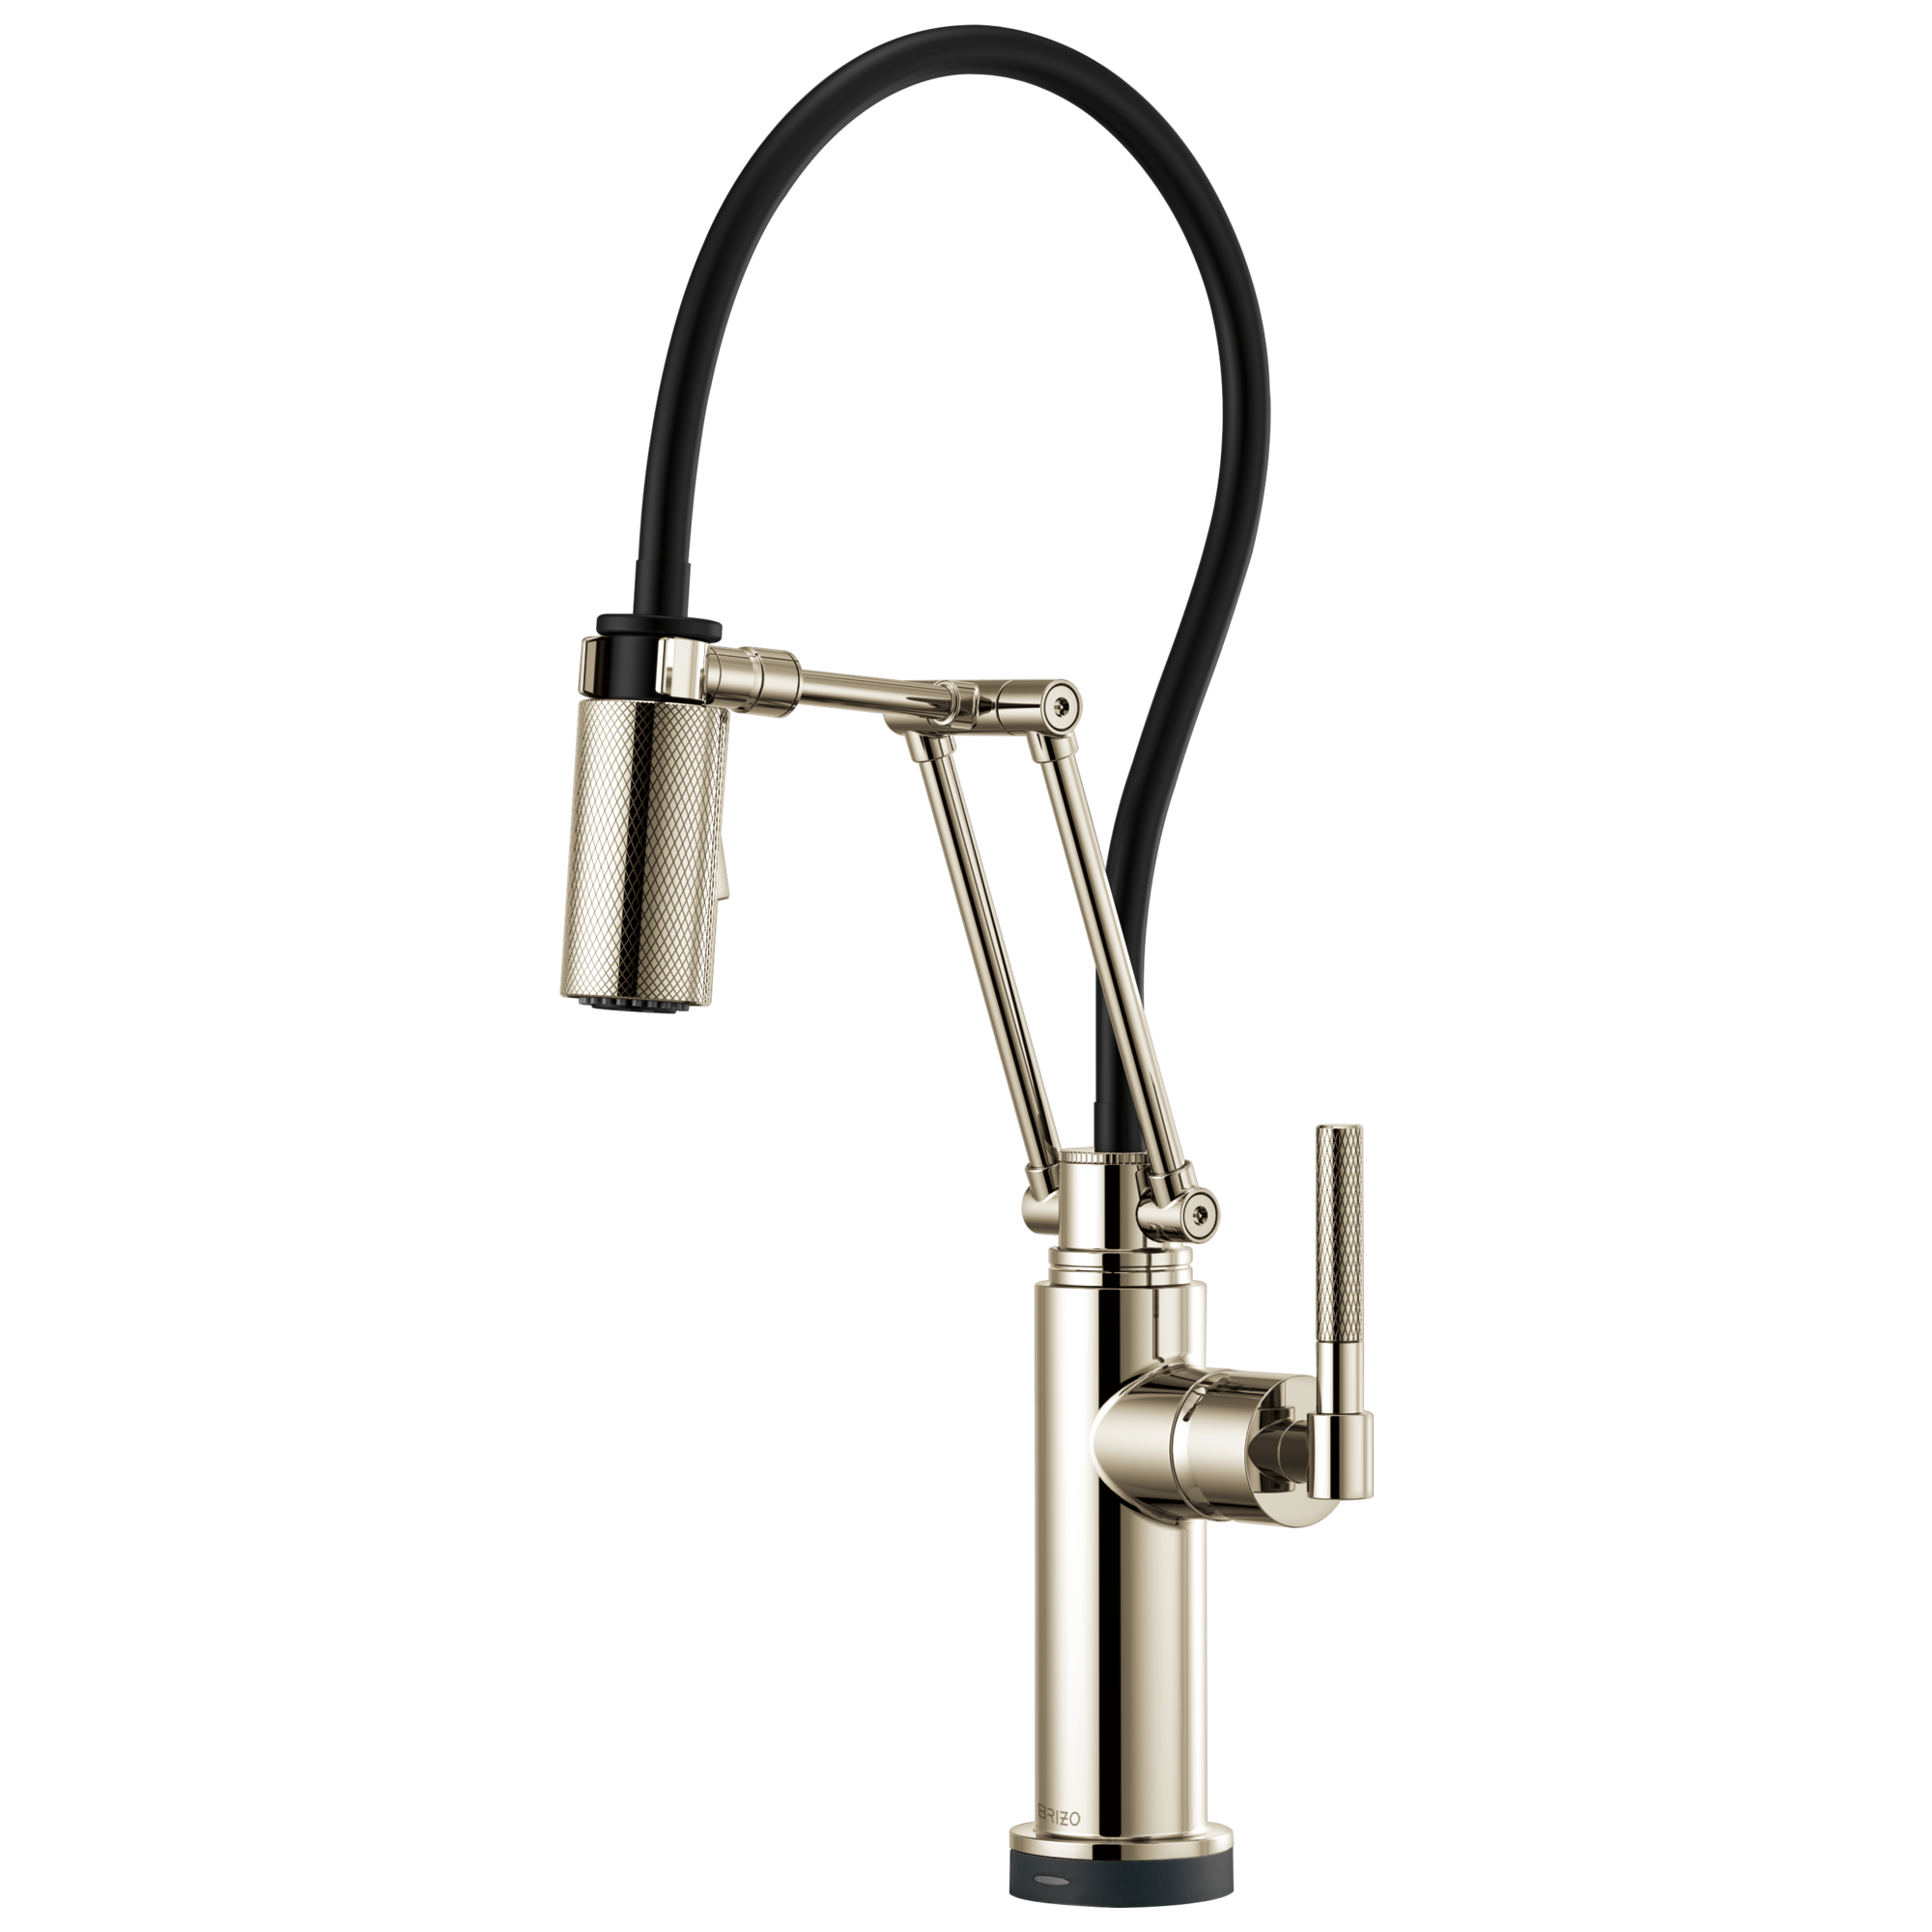 Brizo Litze Smart Touch Articulating Kitchen Faucet with Knurled Handle